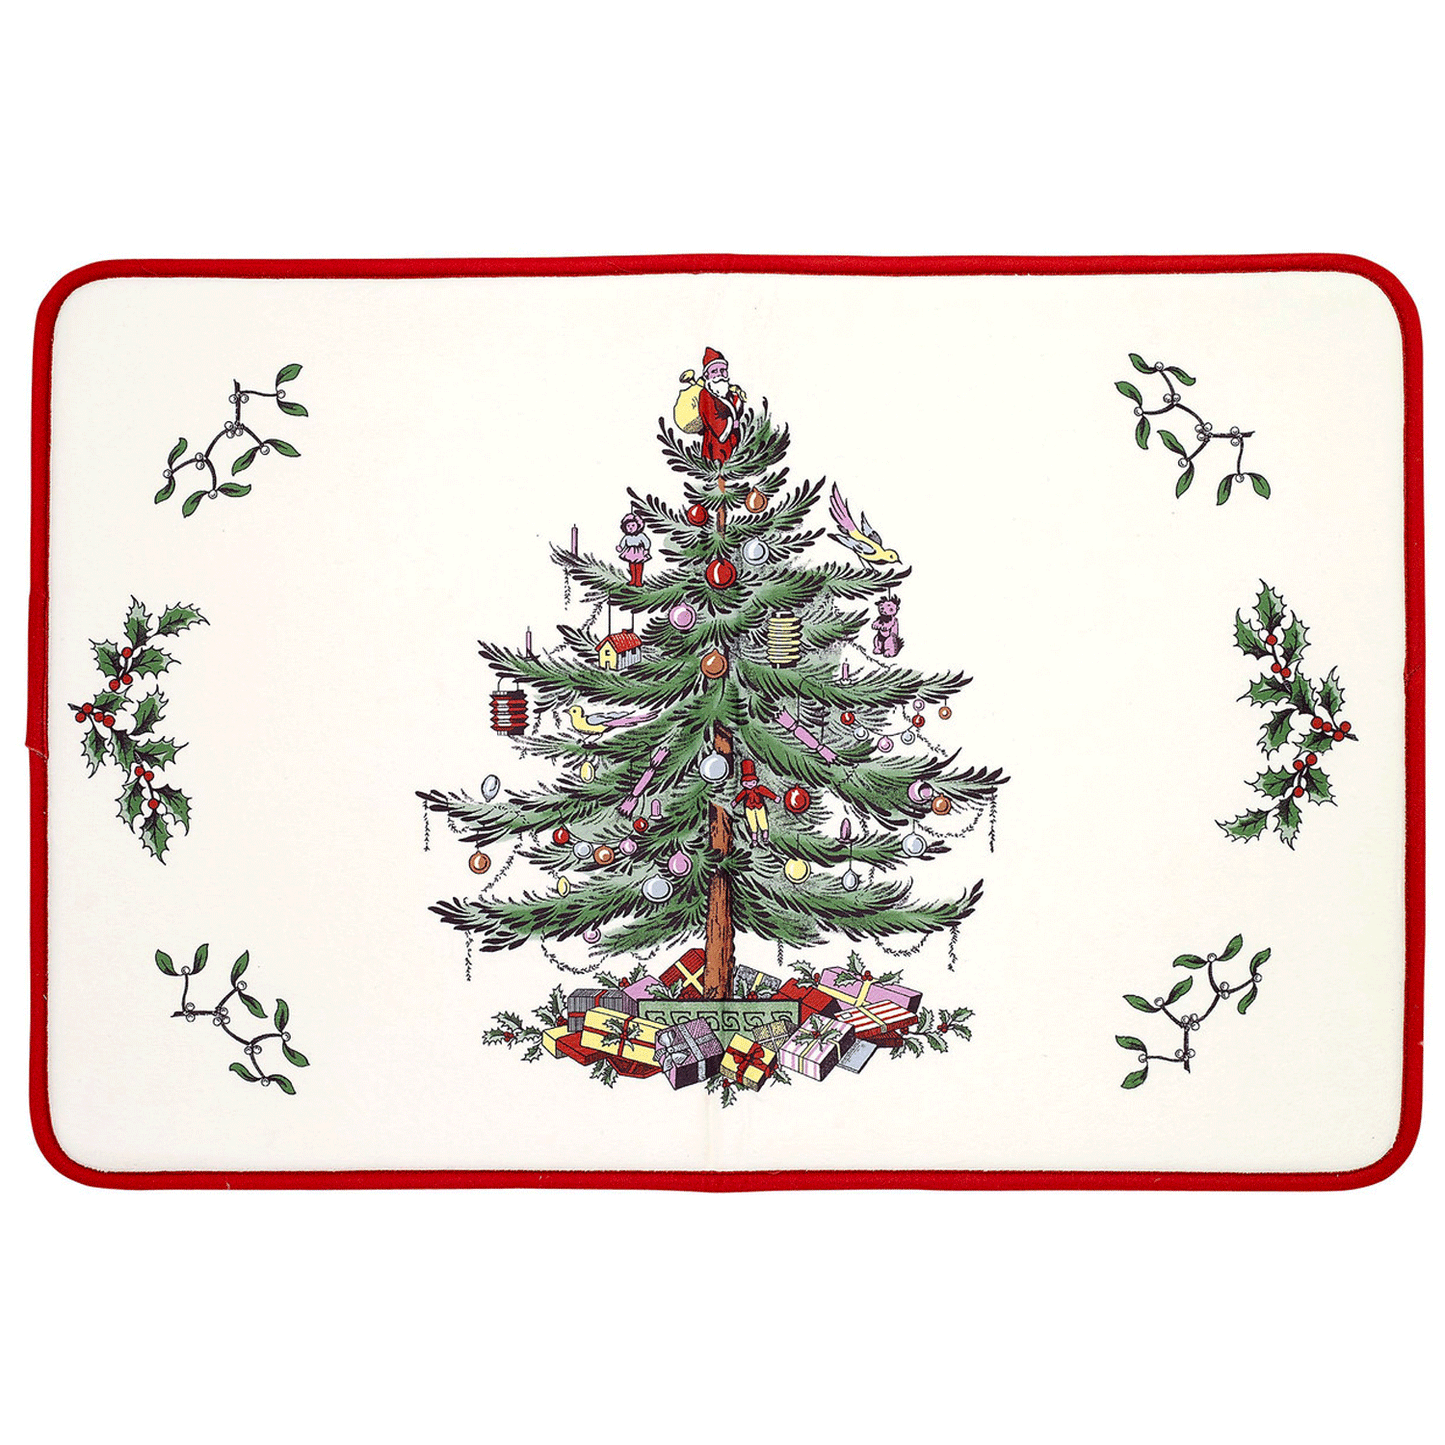 Spode Christmas Tree Fabric Shower Curtain and Bath Accessories